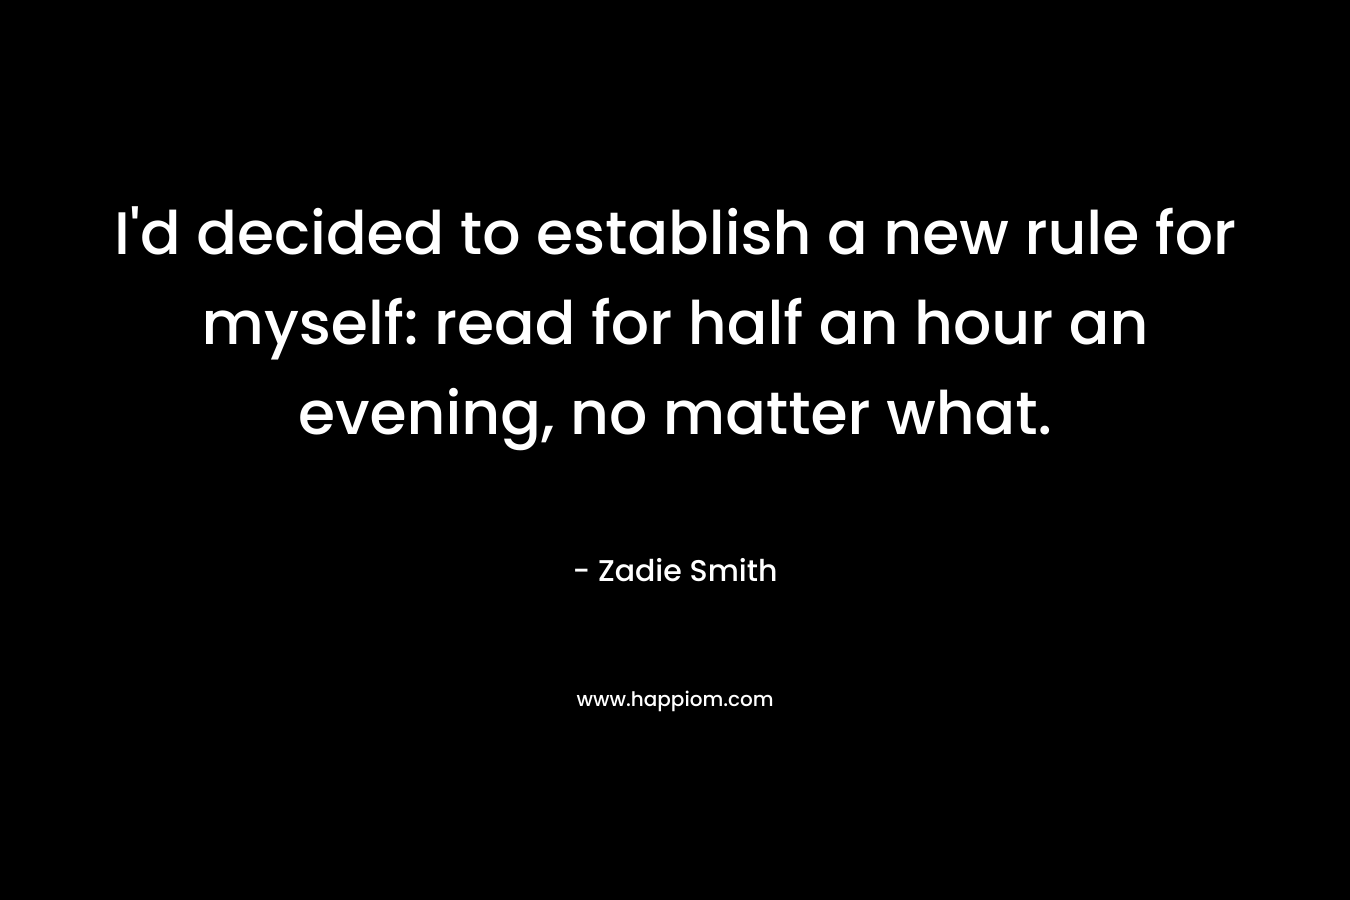 I’d decided to establish a new rule for myself: read for half an hour an evening, no matter what. – Zadie Smith